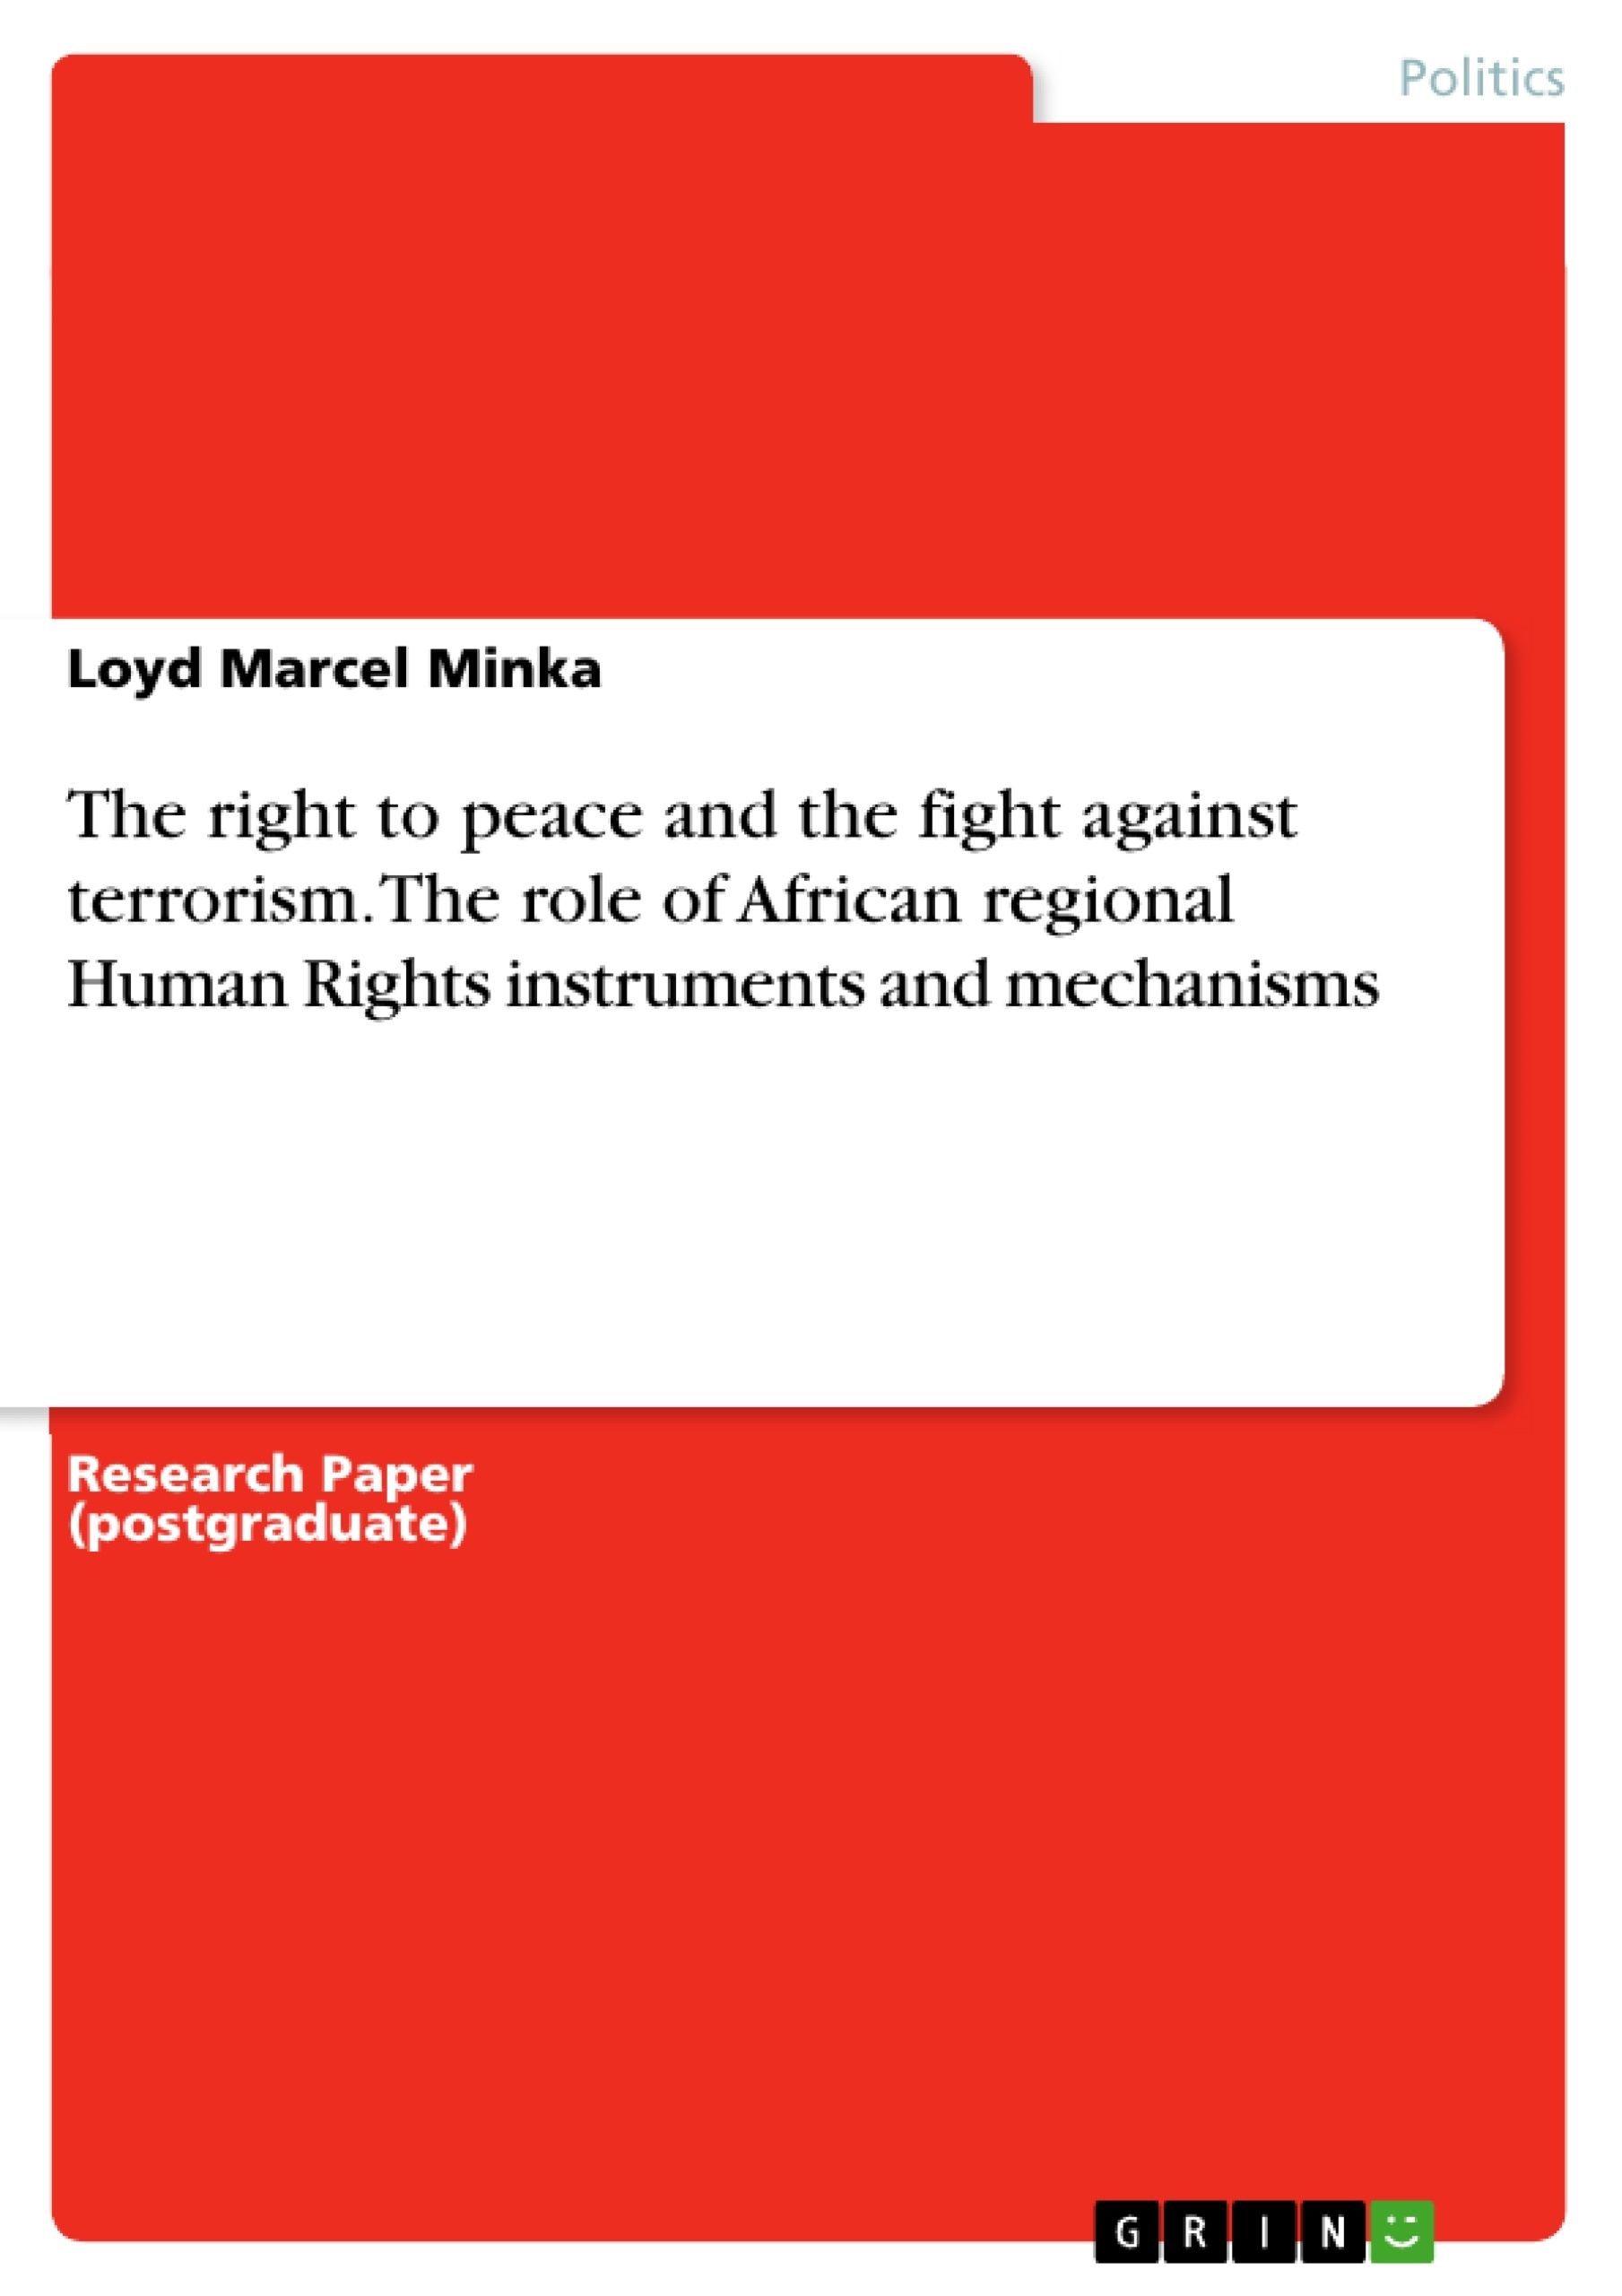 Titre: The right to peace and the fight against terrorism. The role of African regional Human Rights instruments and mechanisms